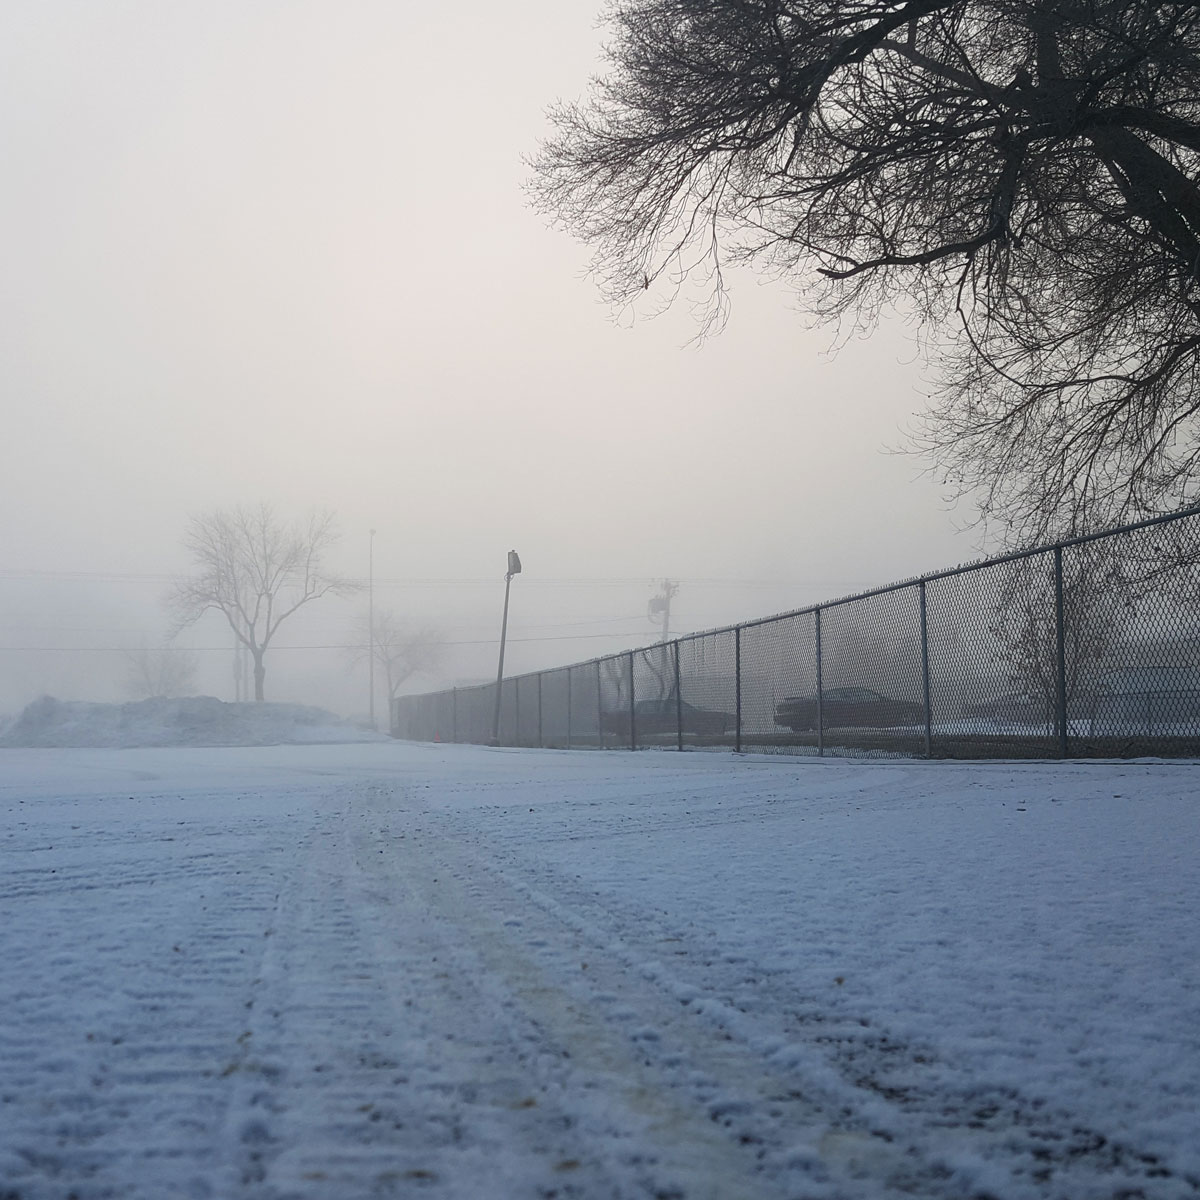 A foggy morning with a snow covered parking lot.In this low to the ground perspective shot a tire track in the snow leads into the distance.